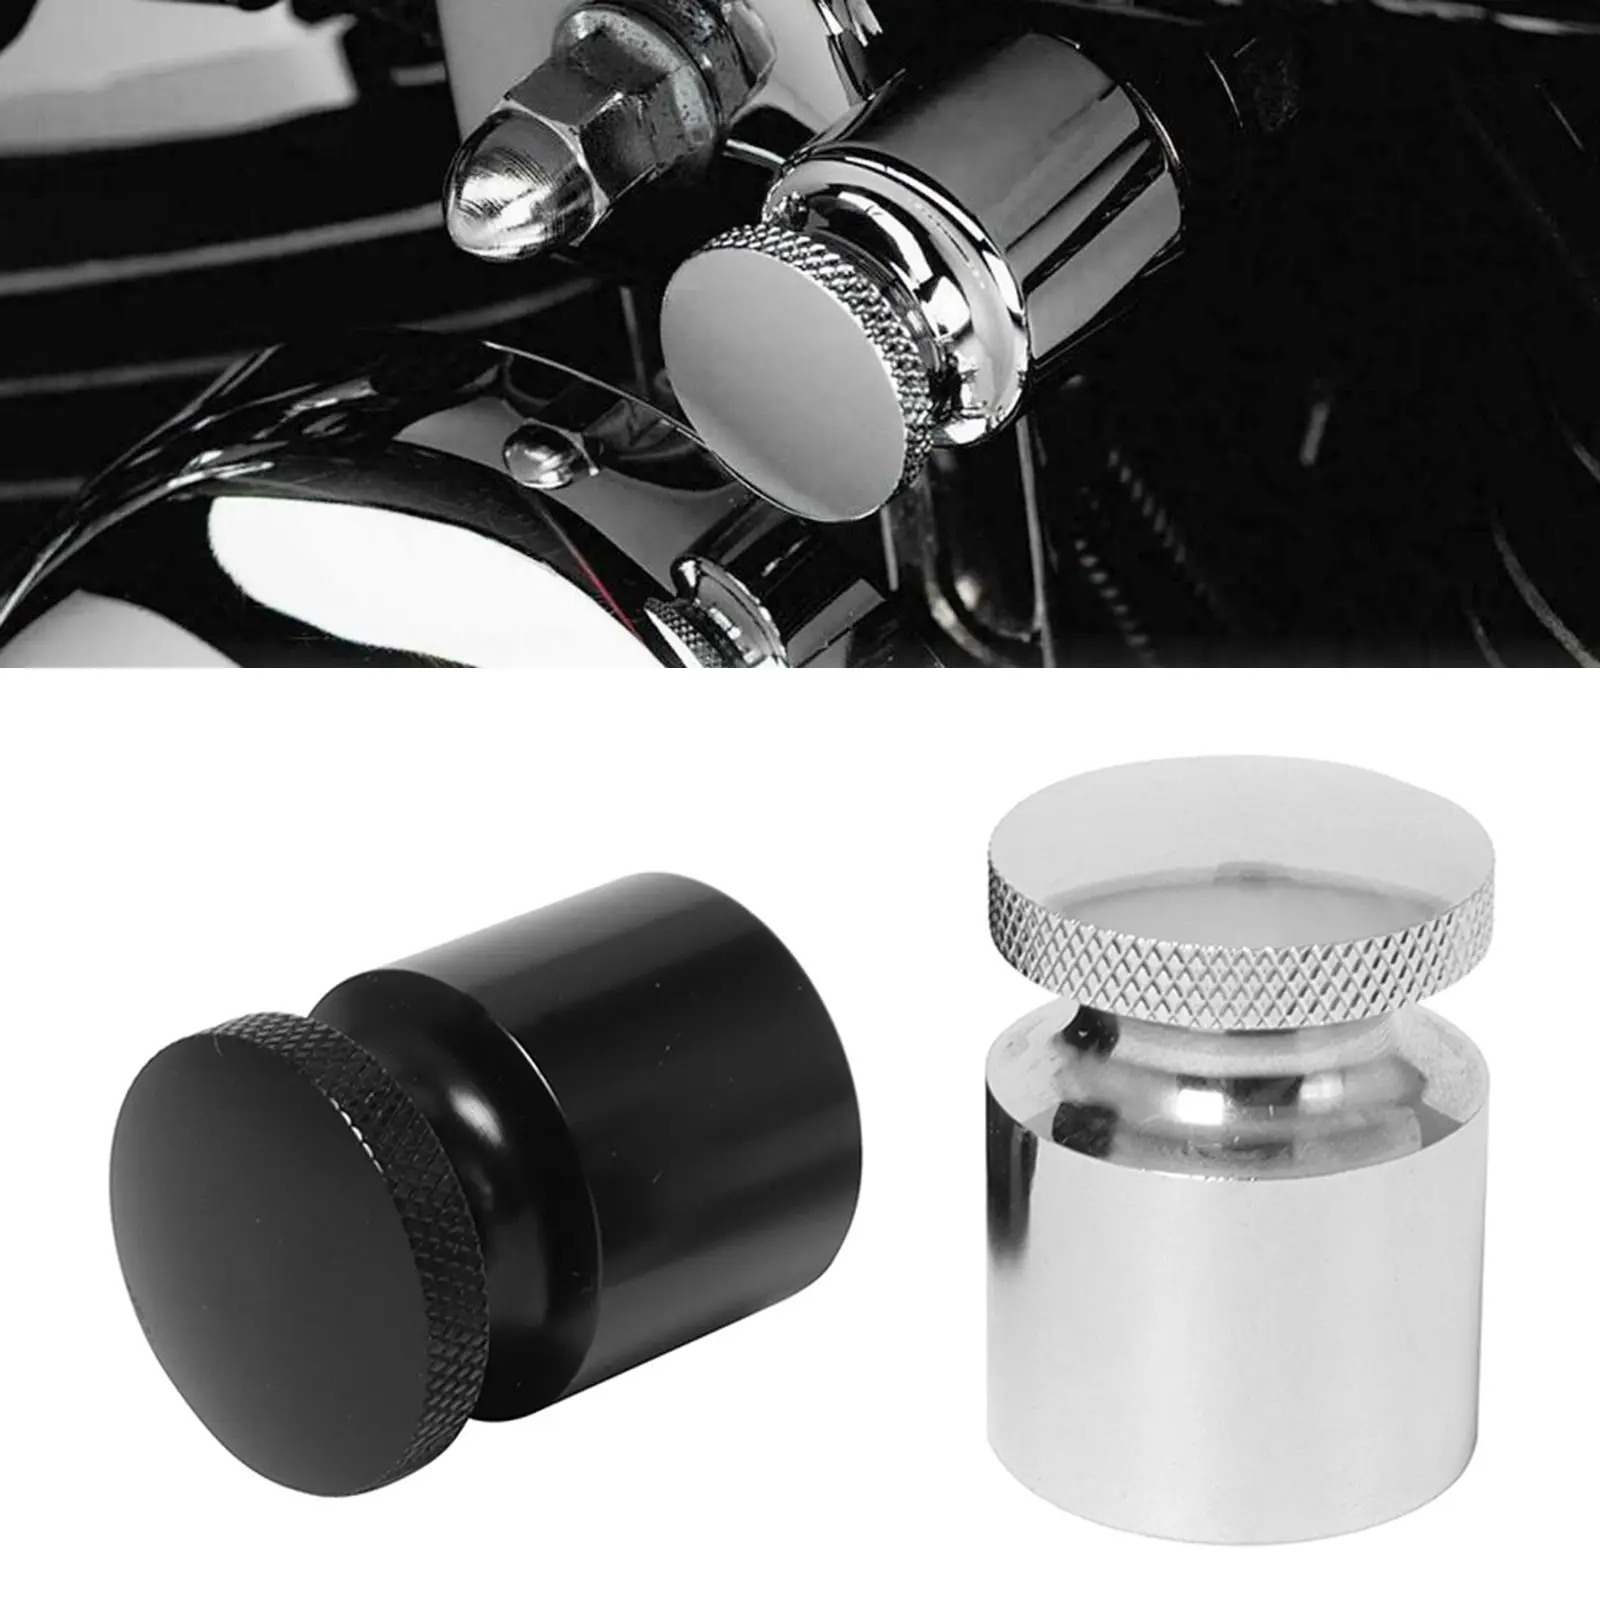 Accessory Choke Knob Cover for Harley  Electra with Threaded Brass Insert Parts Professional Easy to Install 1x